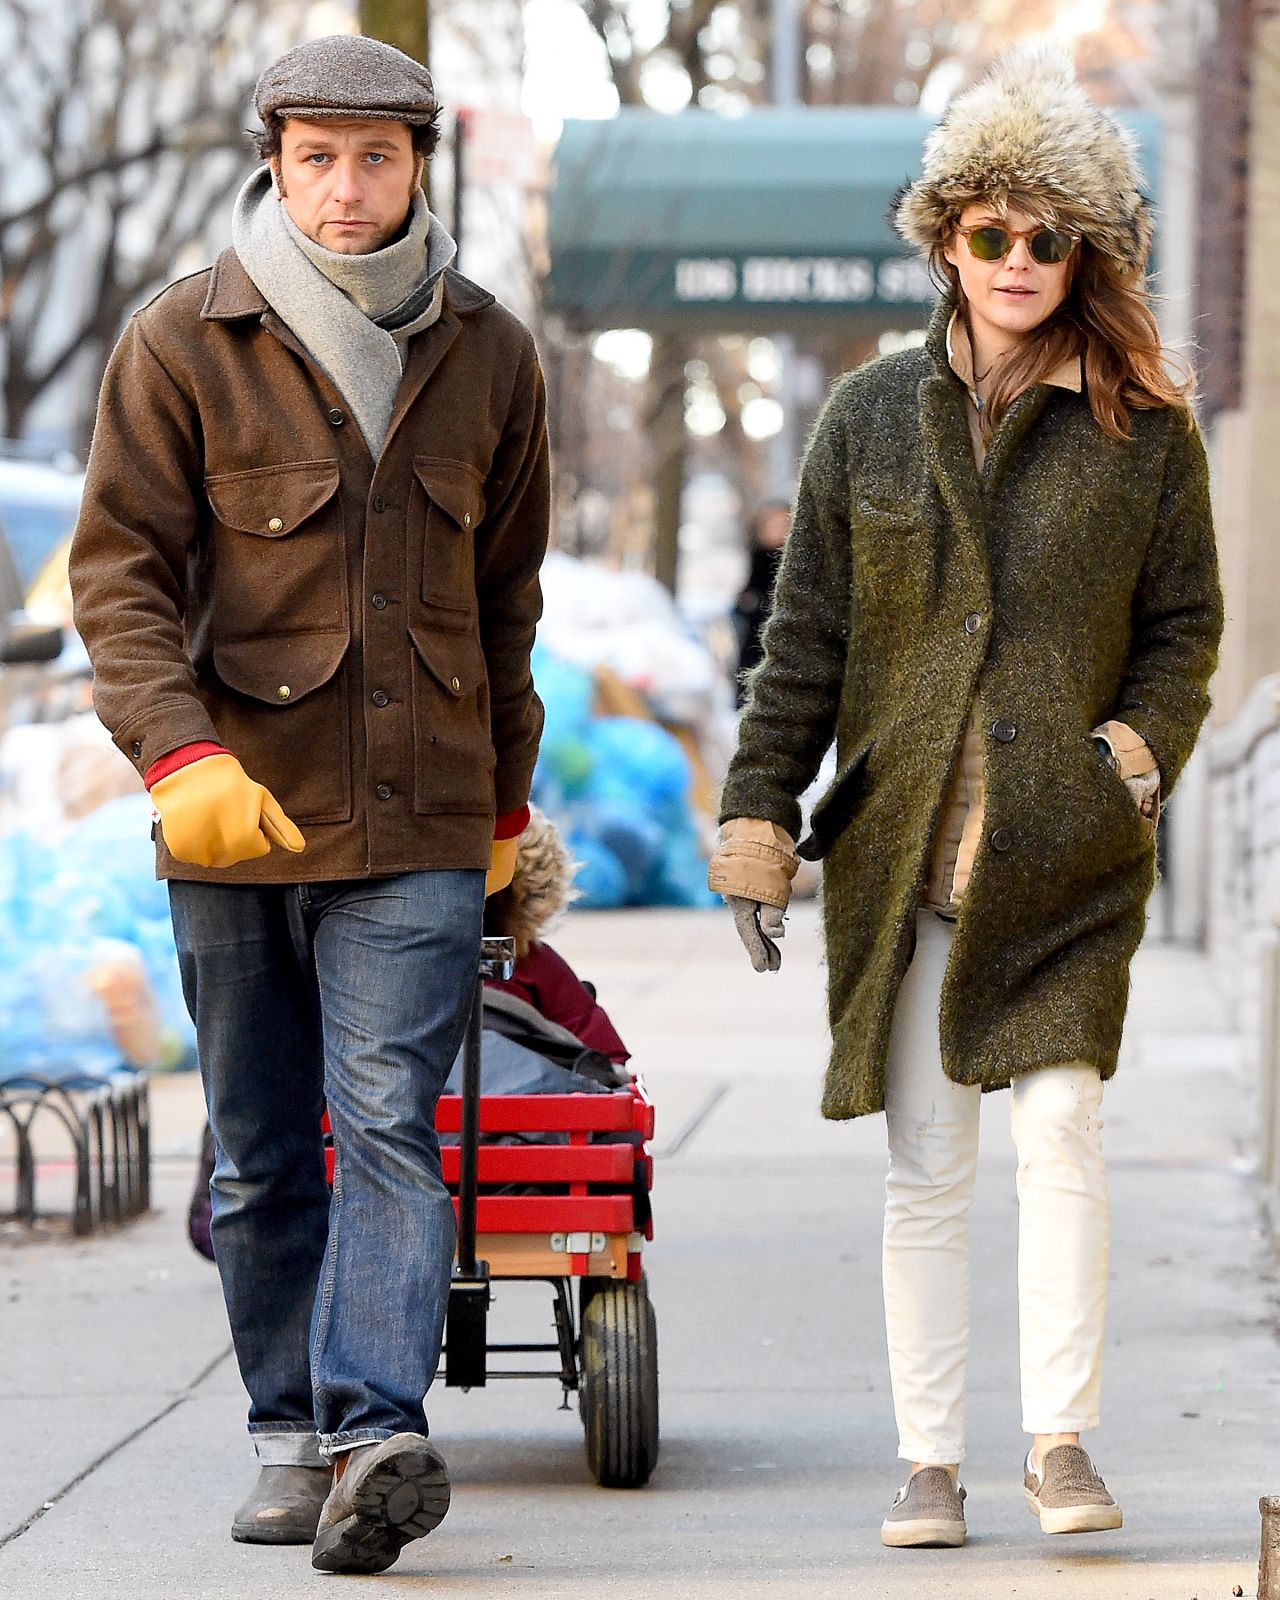 keri-russell-winter-style-out-in-brooklyn-february-2016-8.